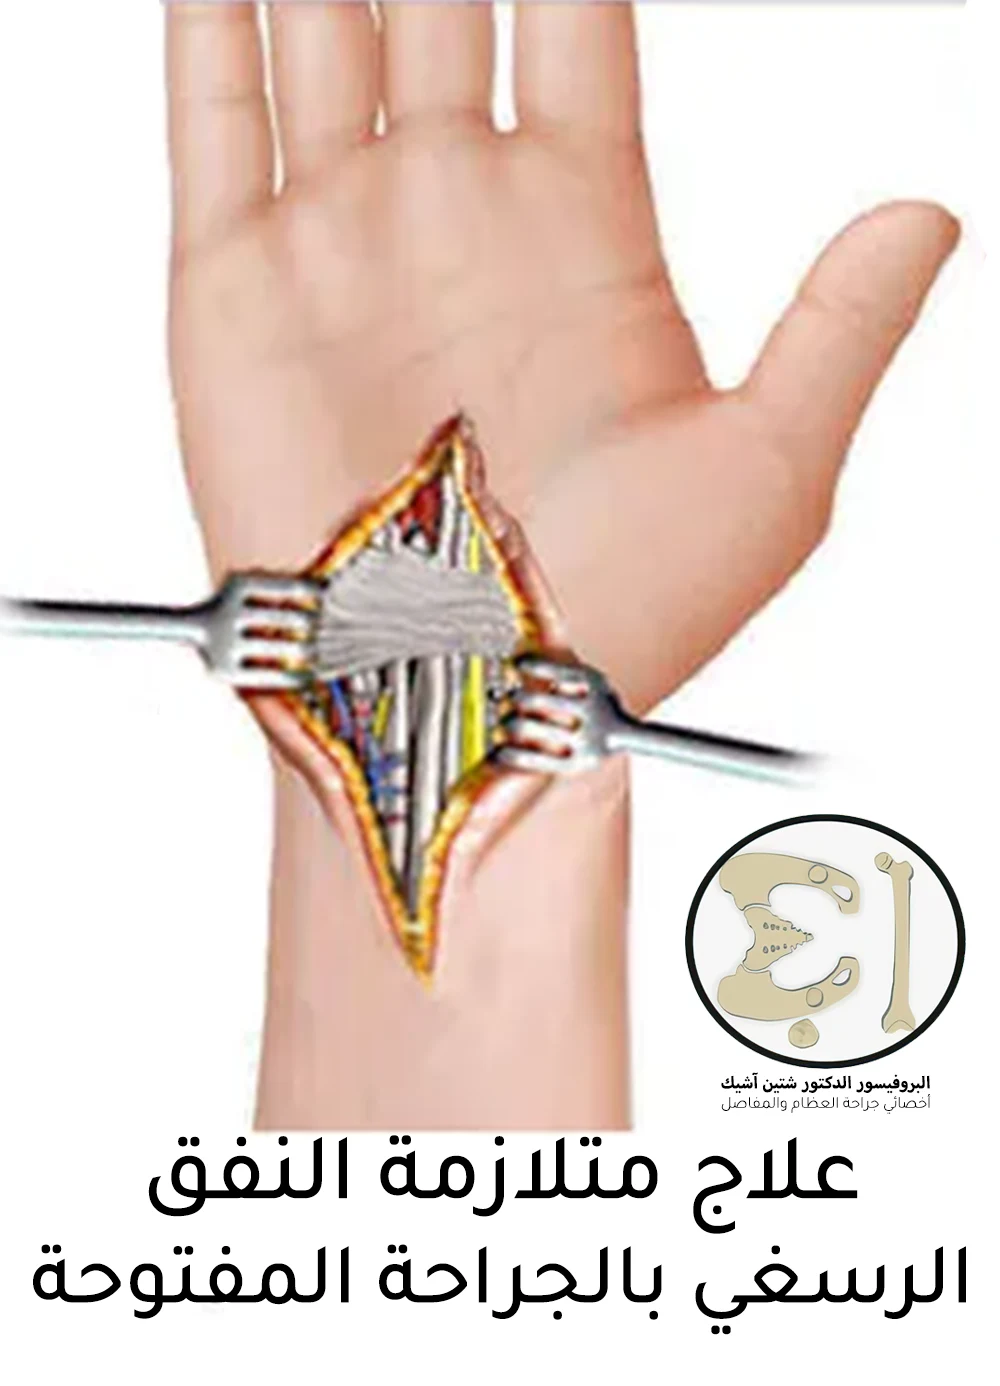 An image showing the treatment of carpal tunnel syndrome with open surgery